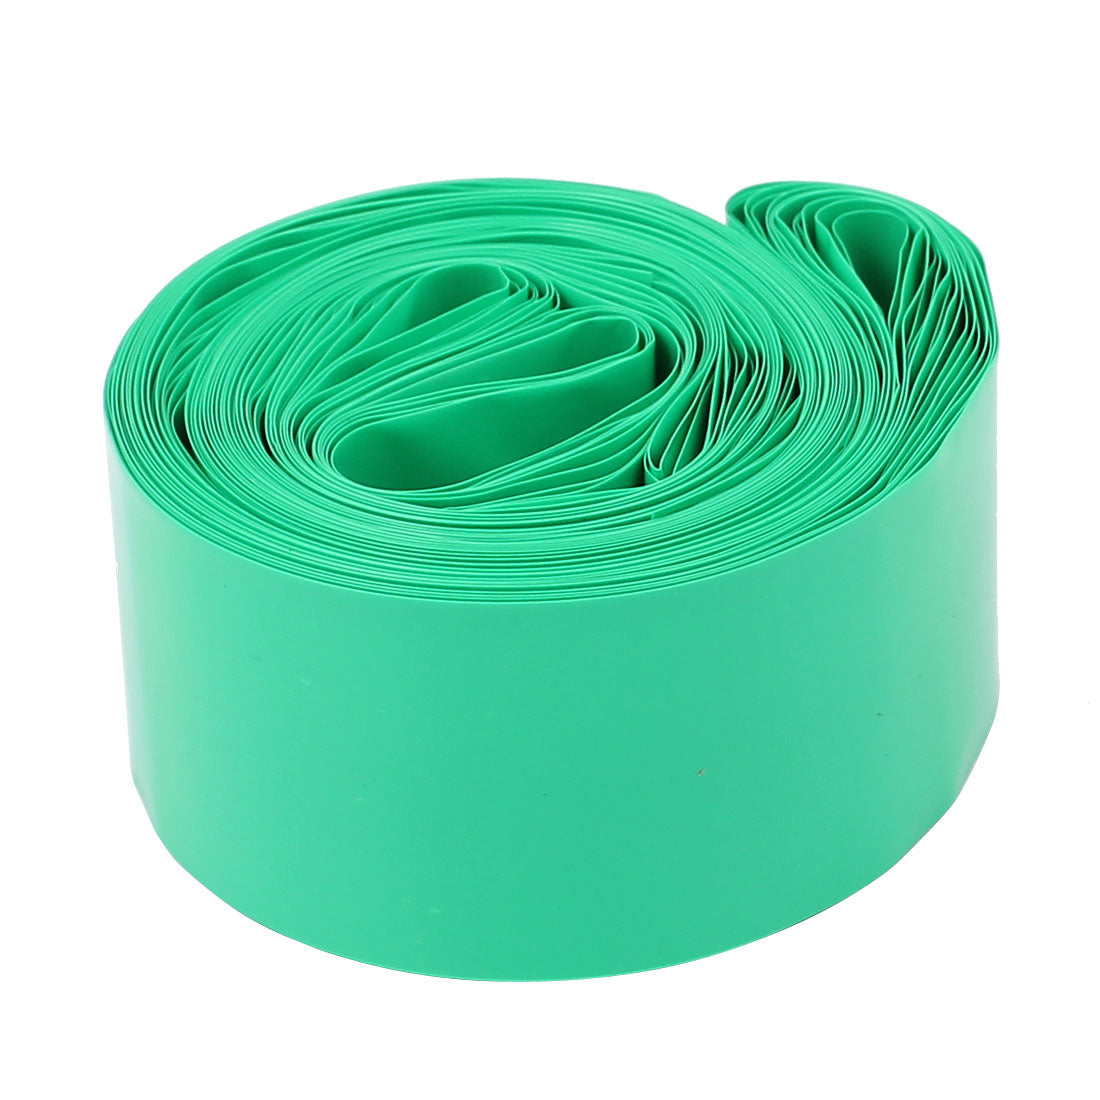 uxcell Uxcell 30mm Flat Width 12M Length PVC Heat Shrink Tube Tubing Green for 1 x 18650 Battery